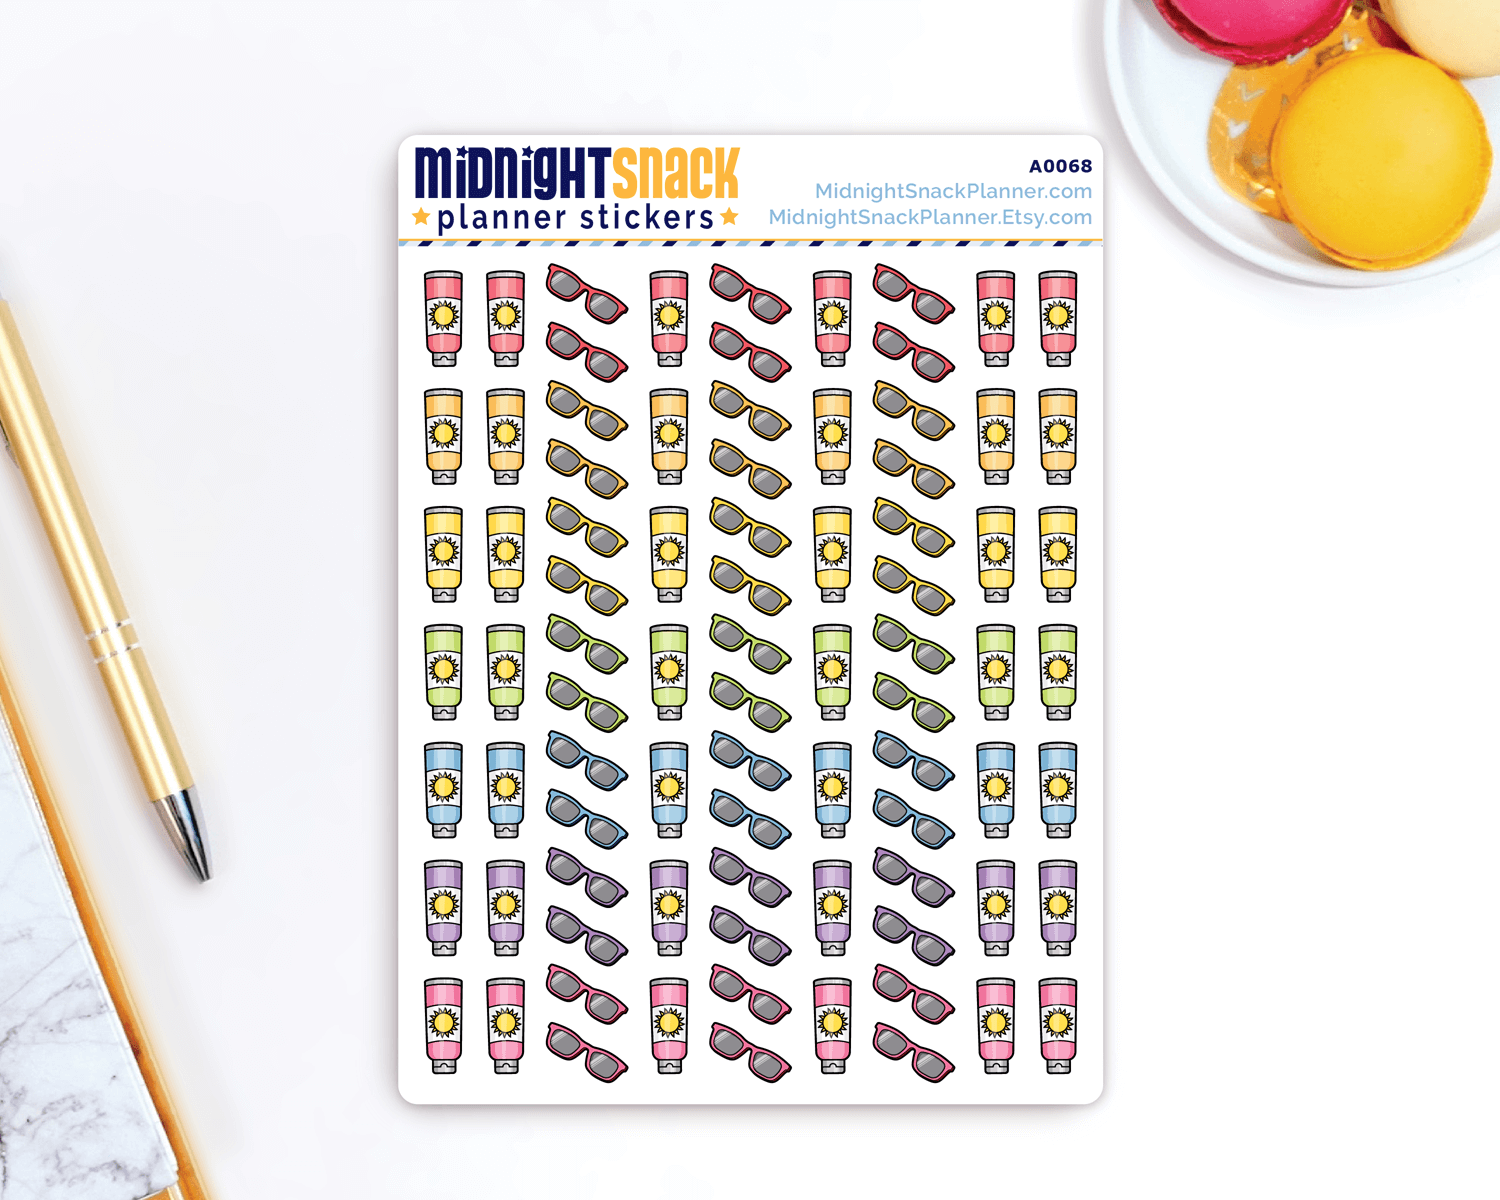 Sun protection planner stickers full sheet. Featuring hand drawn sunscreen and sunglasses icons in a variety of colours. 